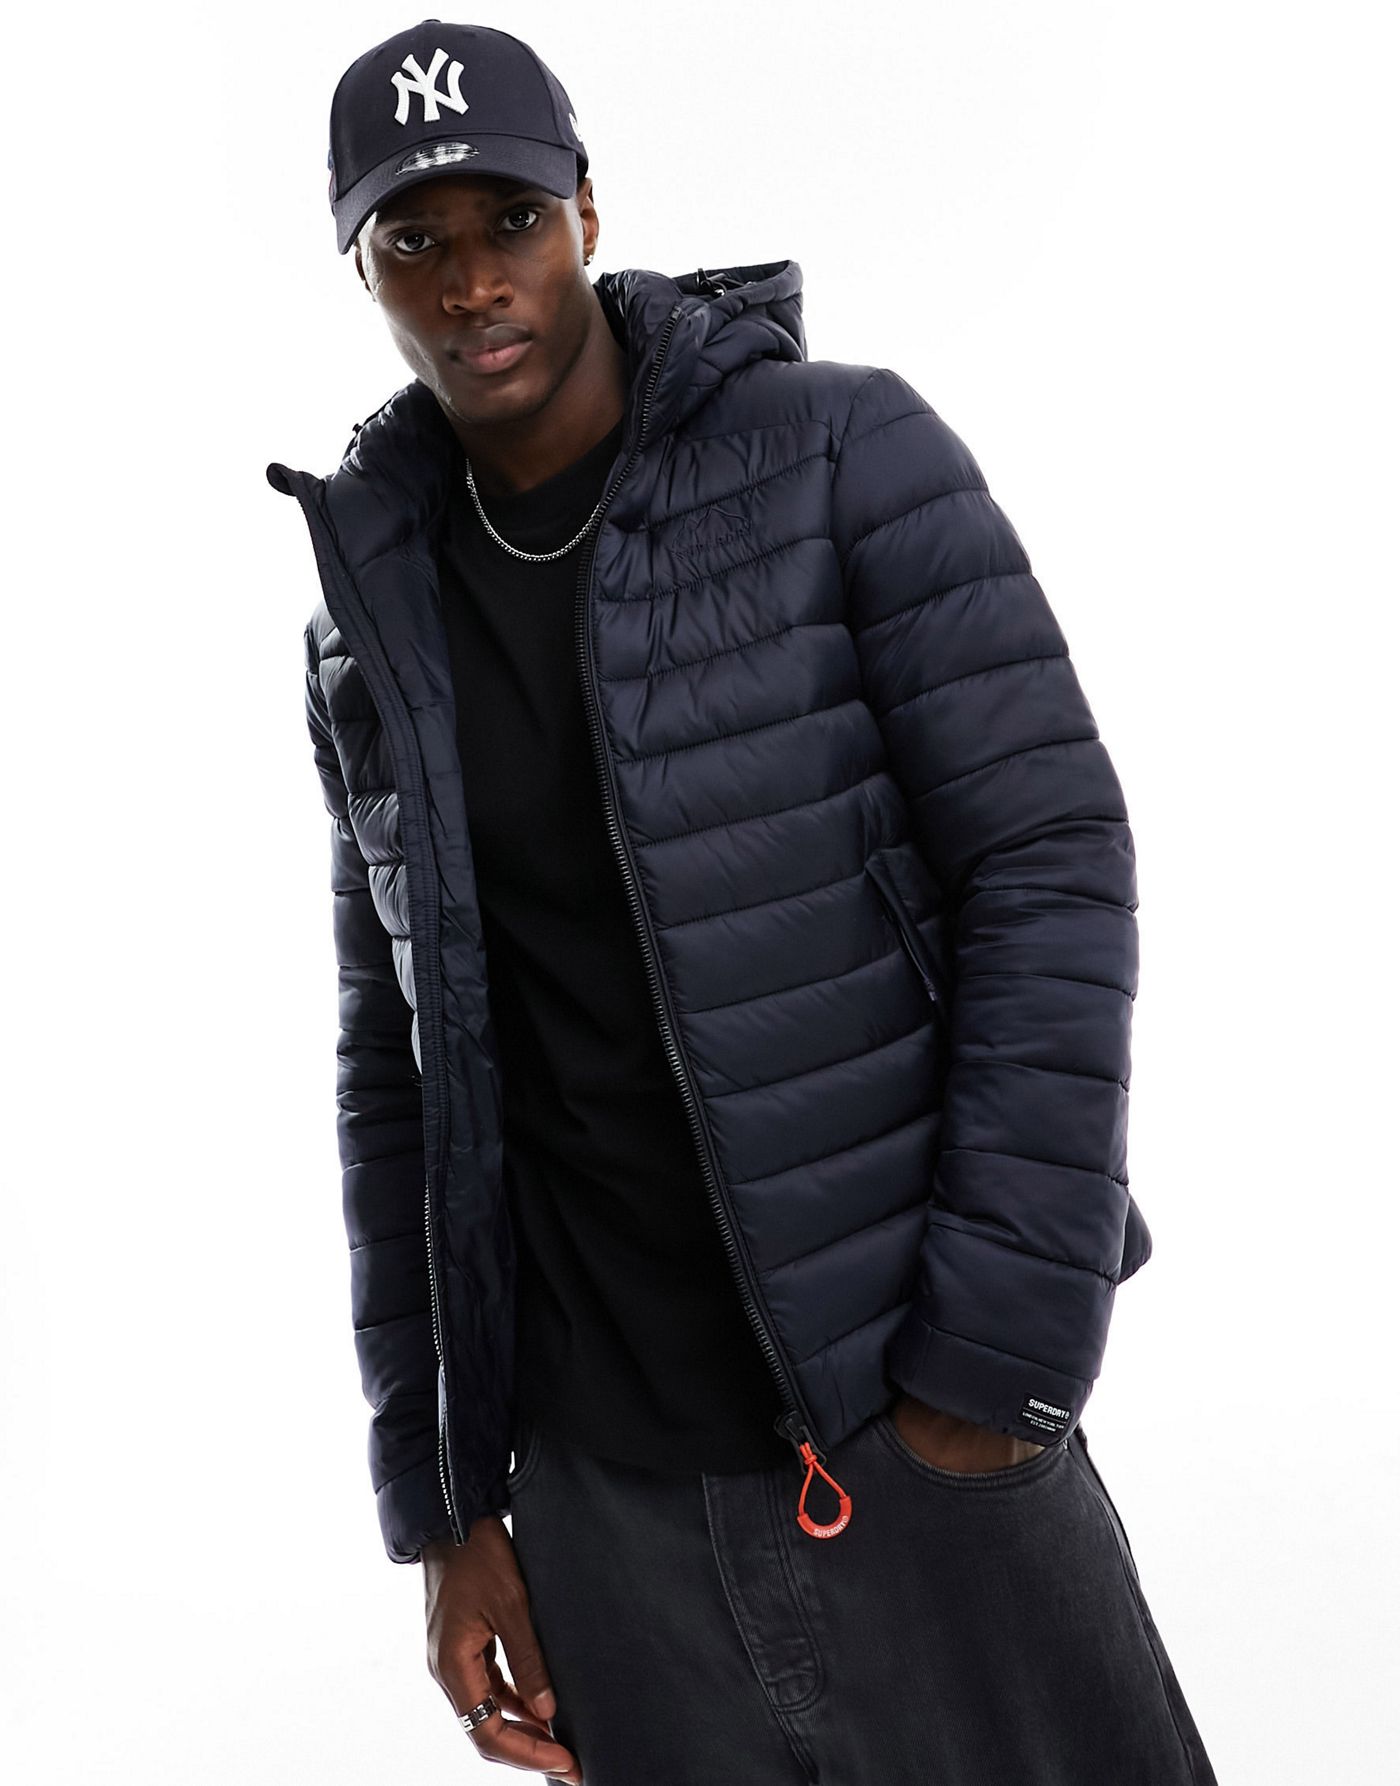 Superdry Hooded fuji sport padded jacket in eclipse navy